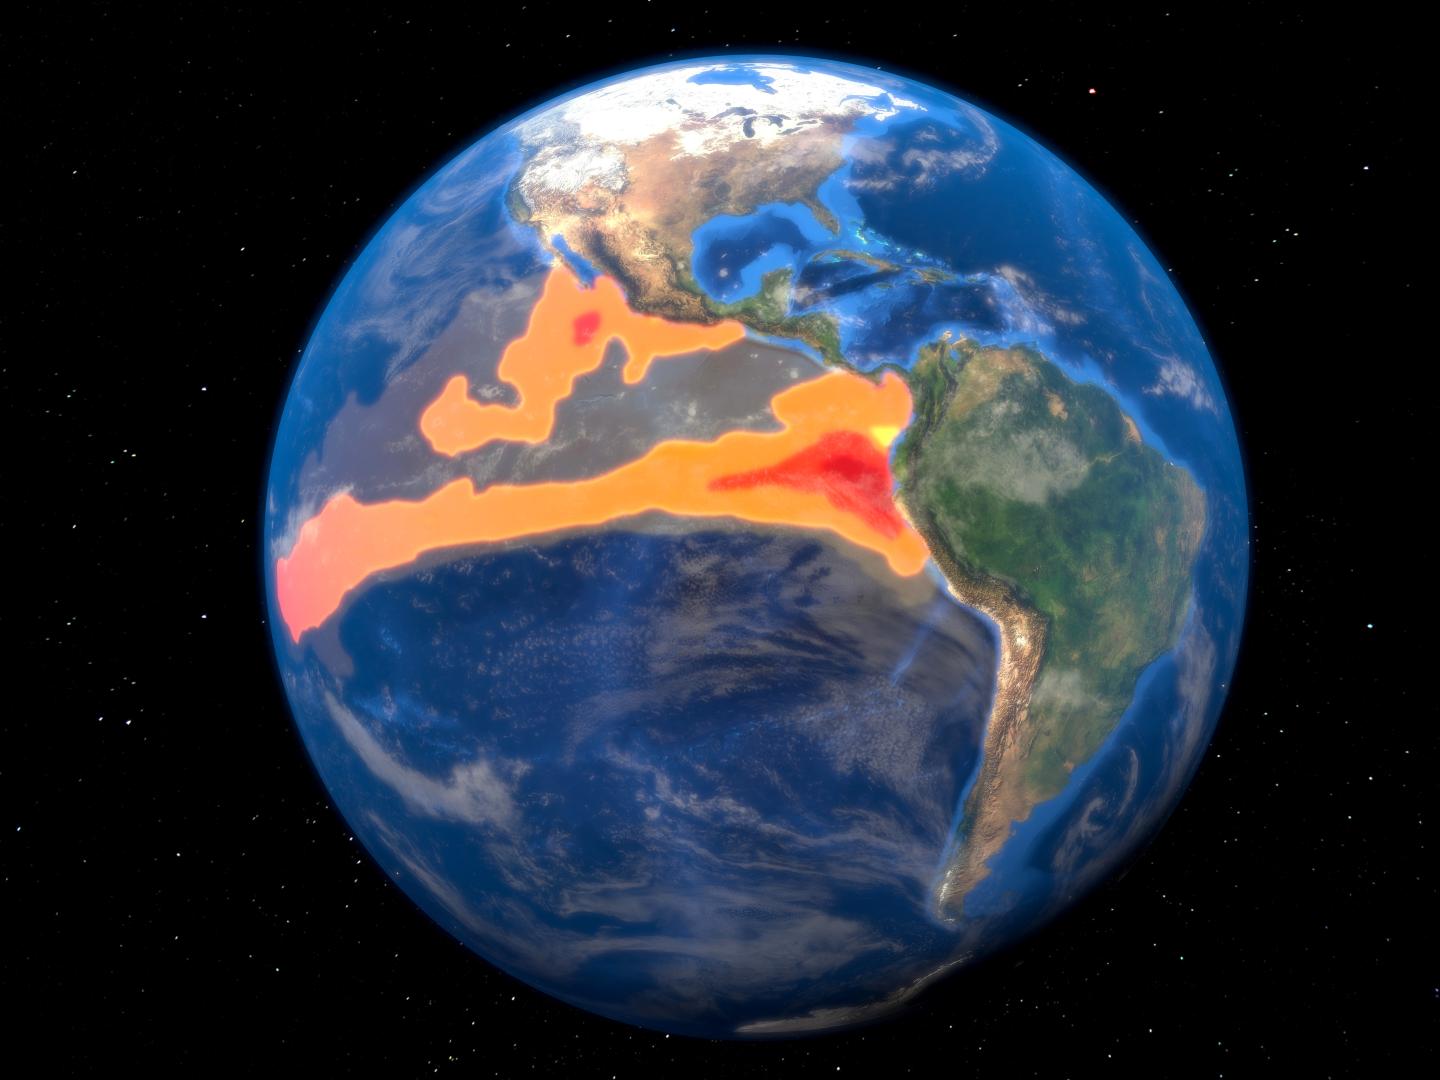 A graphic of the Earth showing the El Niño weather pattern